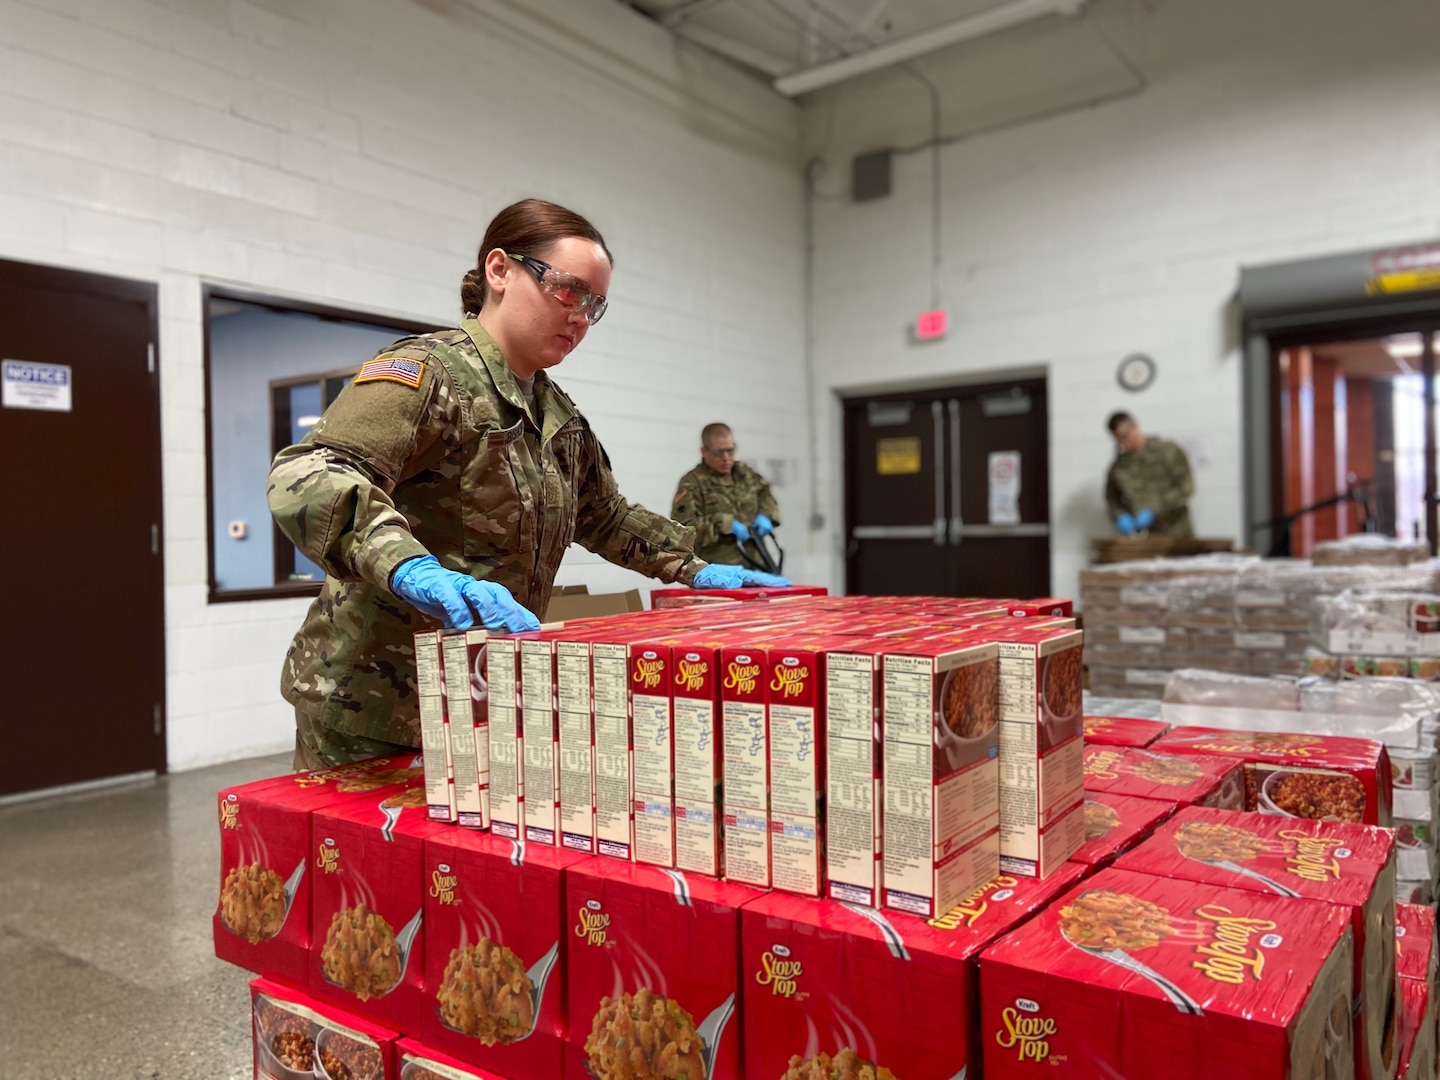 Michigan National Guard members support the distribution of food for families in need during the state’s response to COVID-19 at the Food Bank of Eastern Michigan, Flint, Mich., March 30, 2020. About 40 Michigan Guard members are helping at four Michigan food banks for several weeks.